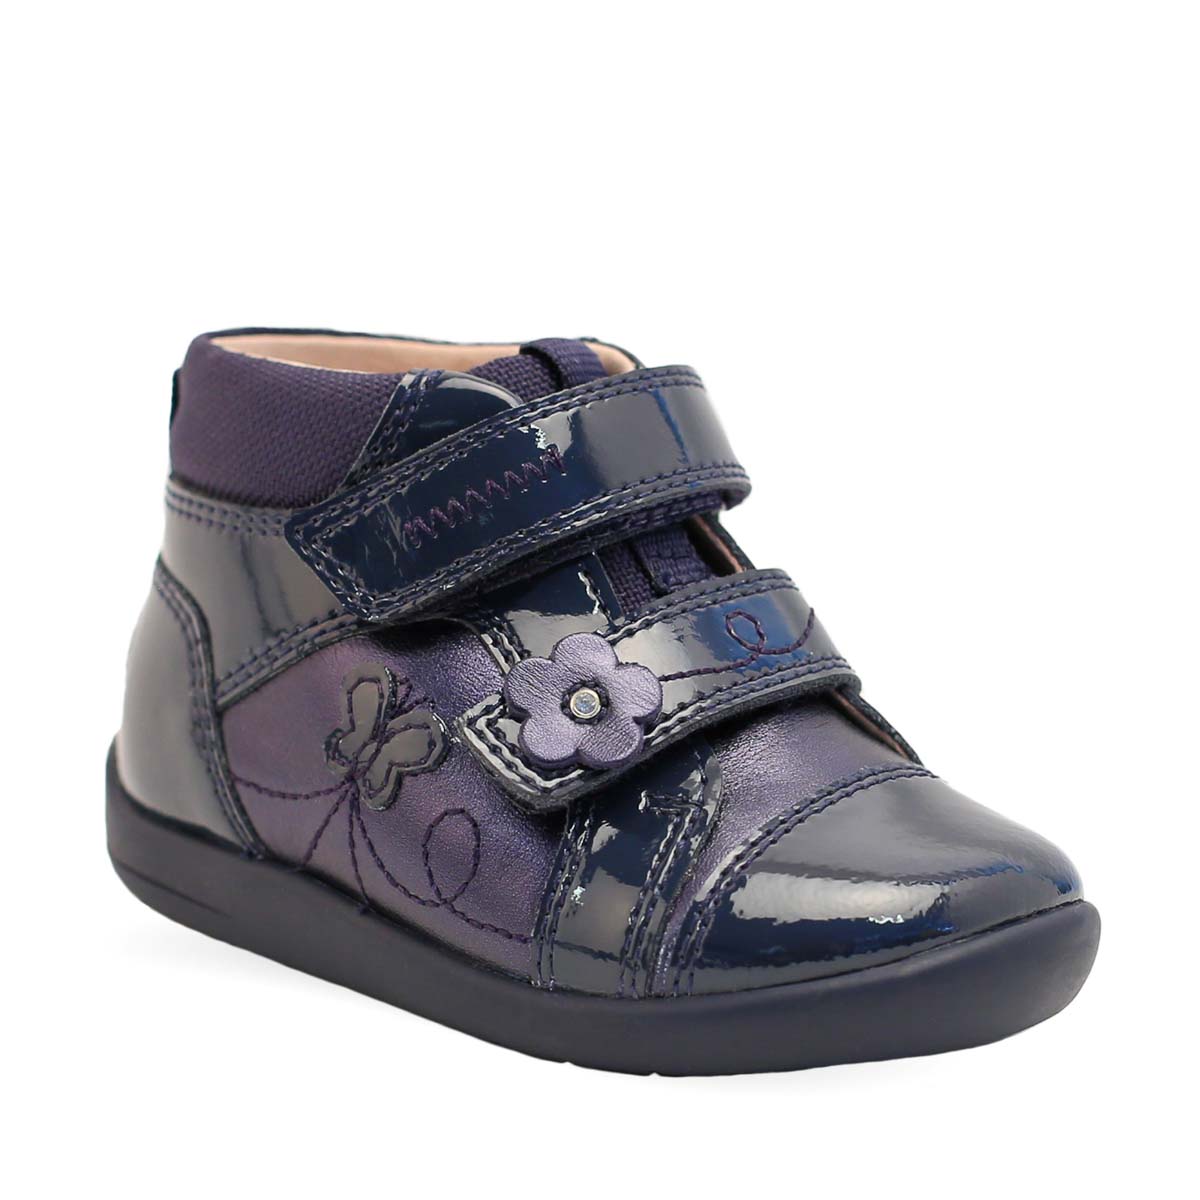 Start Rite - Daydream 2V In Navy Patent 0792-96F In Size 8 In Plain Navy Patent Infant Girls Boots  In Navy Patent For kids